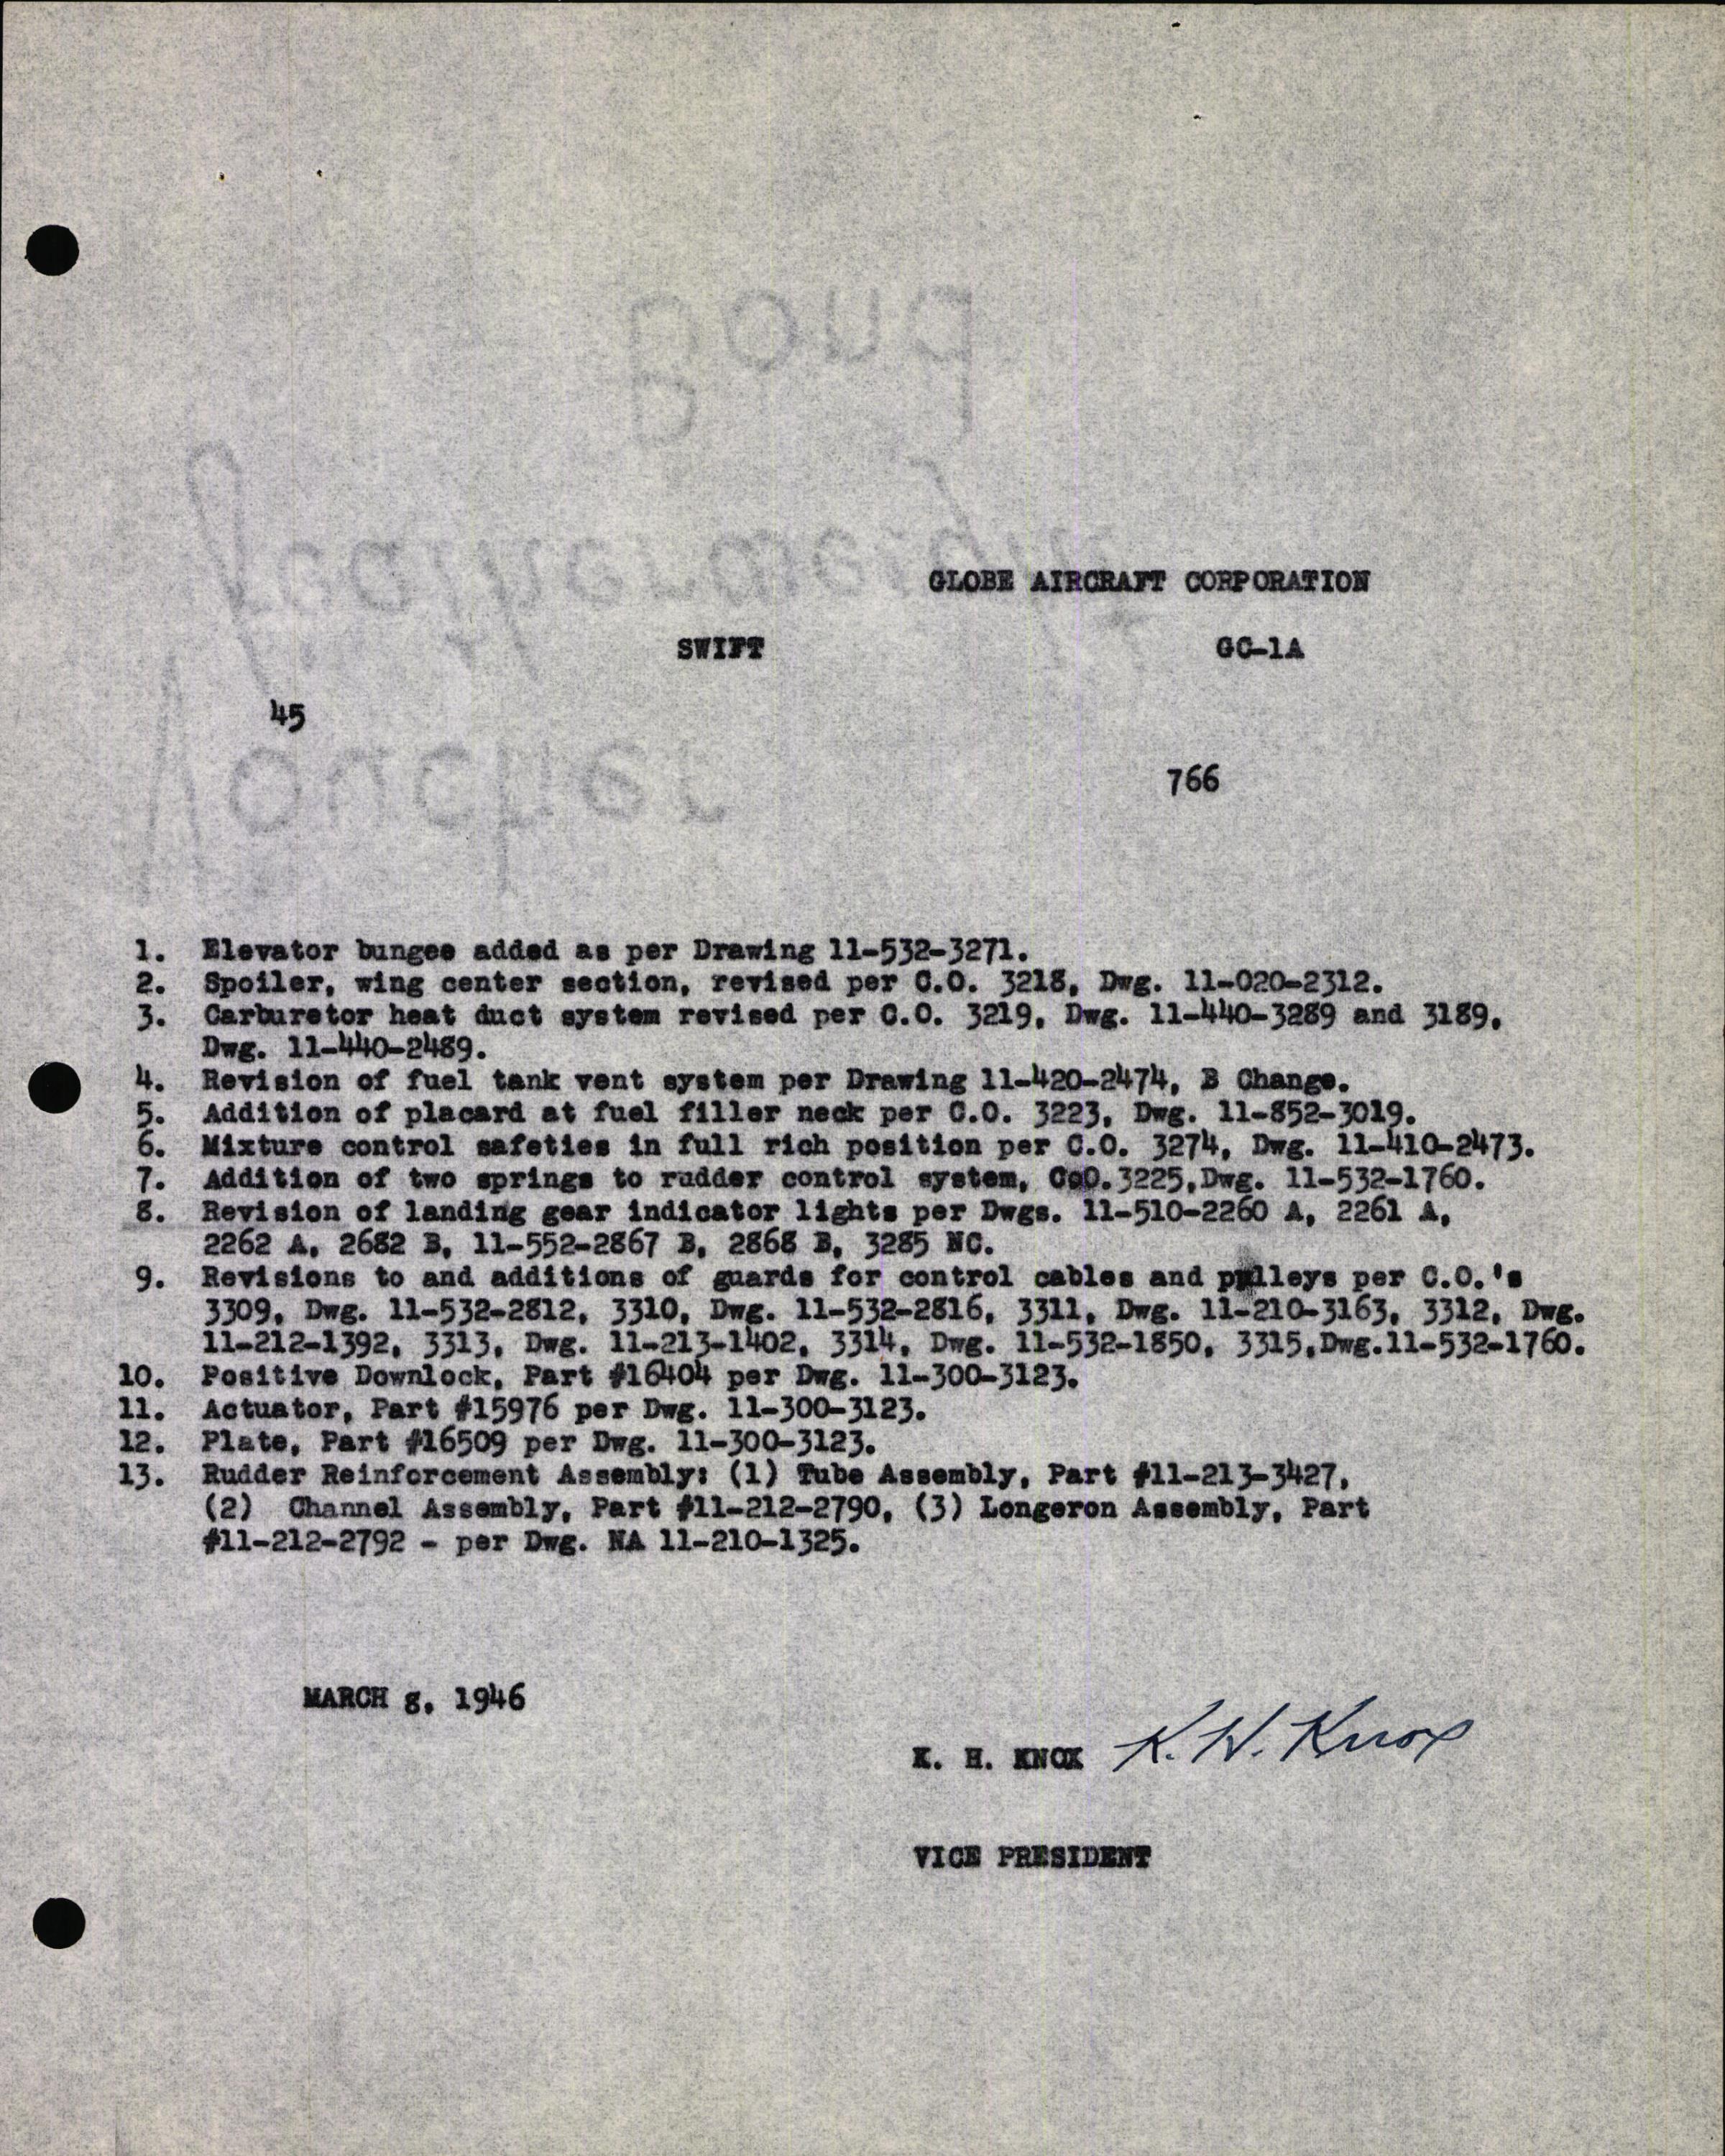 Sample page 7 from AirCorps Library document: Technical Information for Serial Number 45